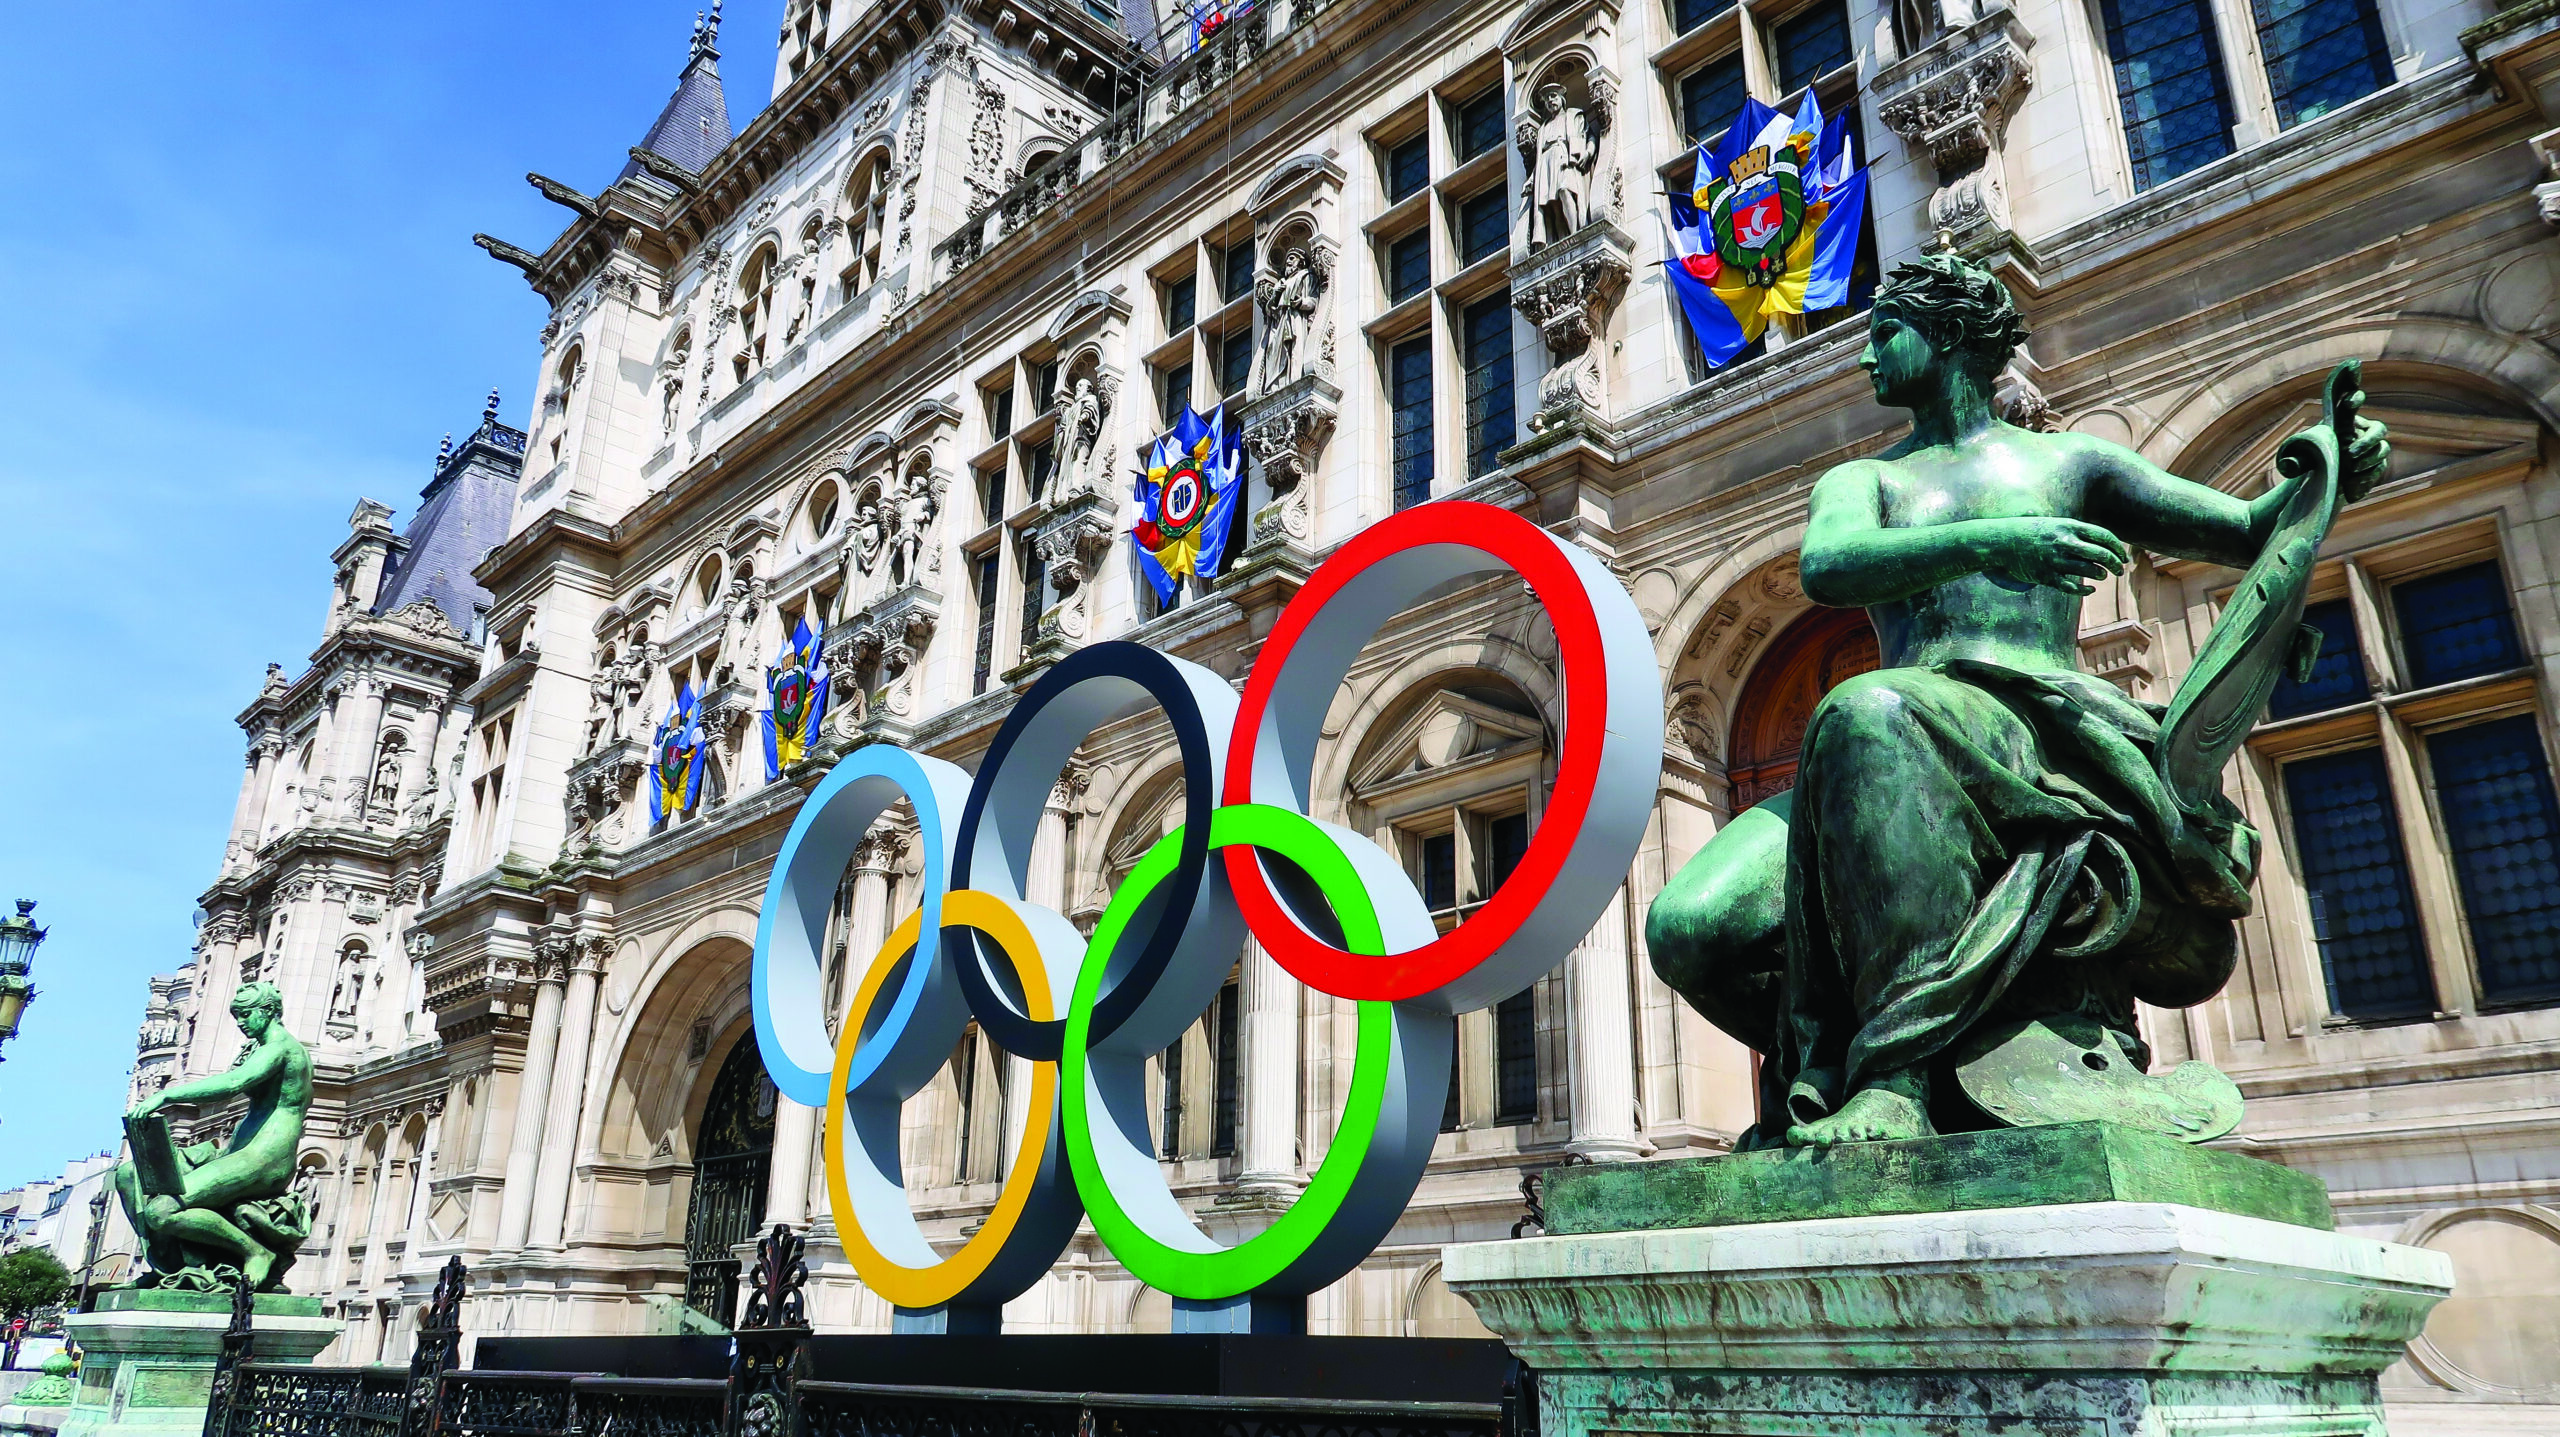 Paris 2024 Olympics Breaks New Ground with Complete Gender Parity